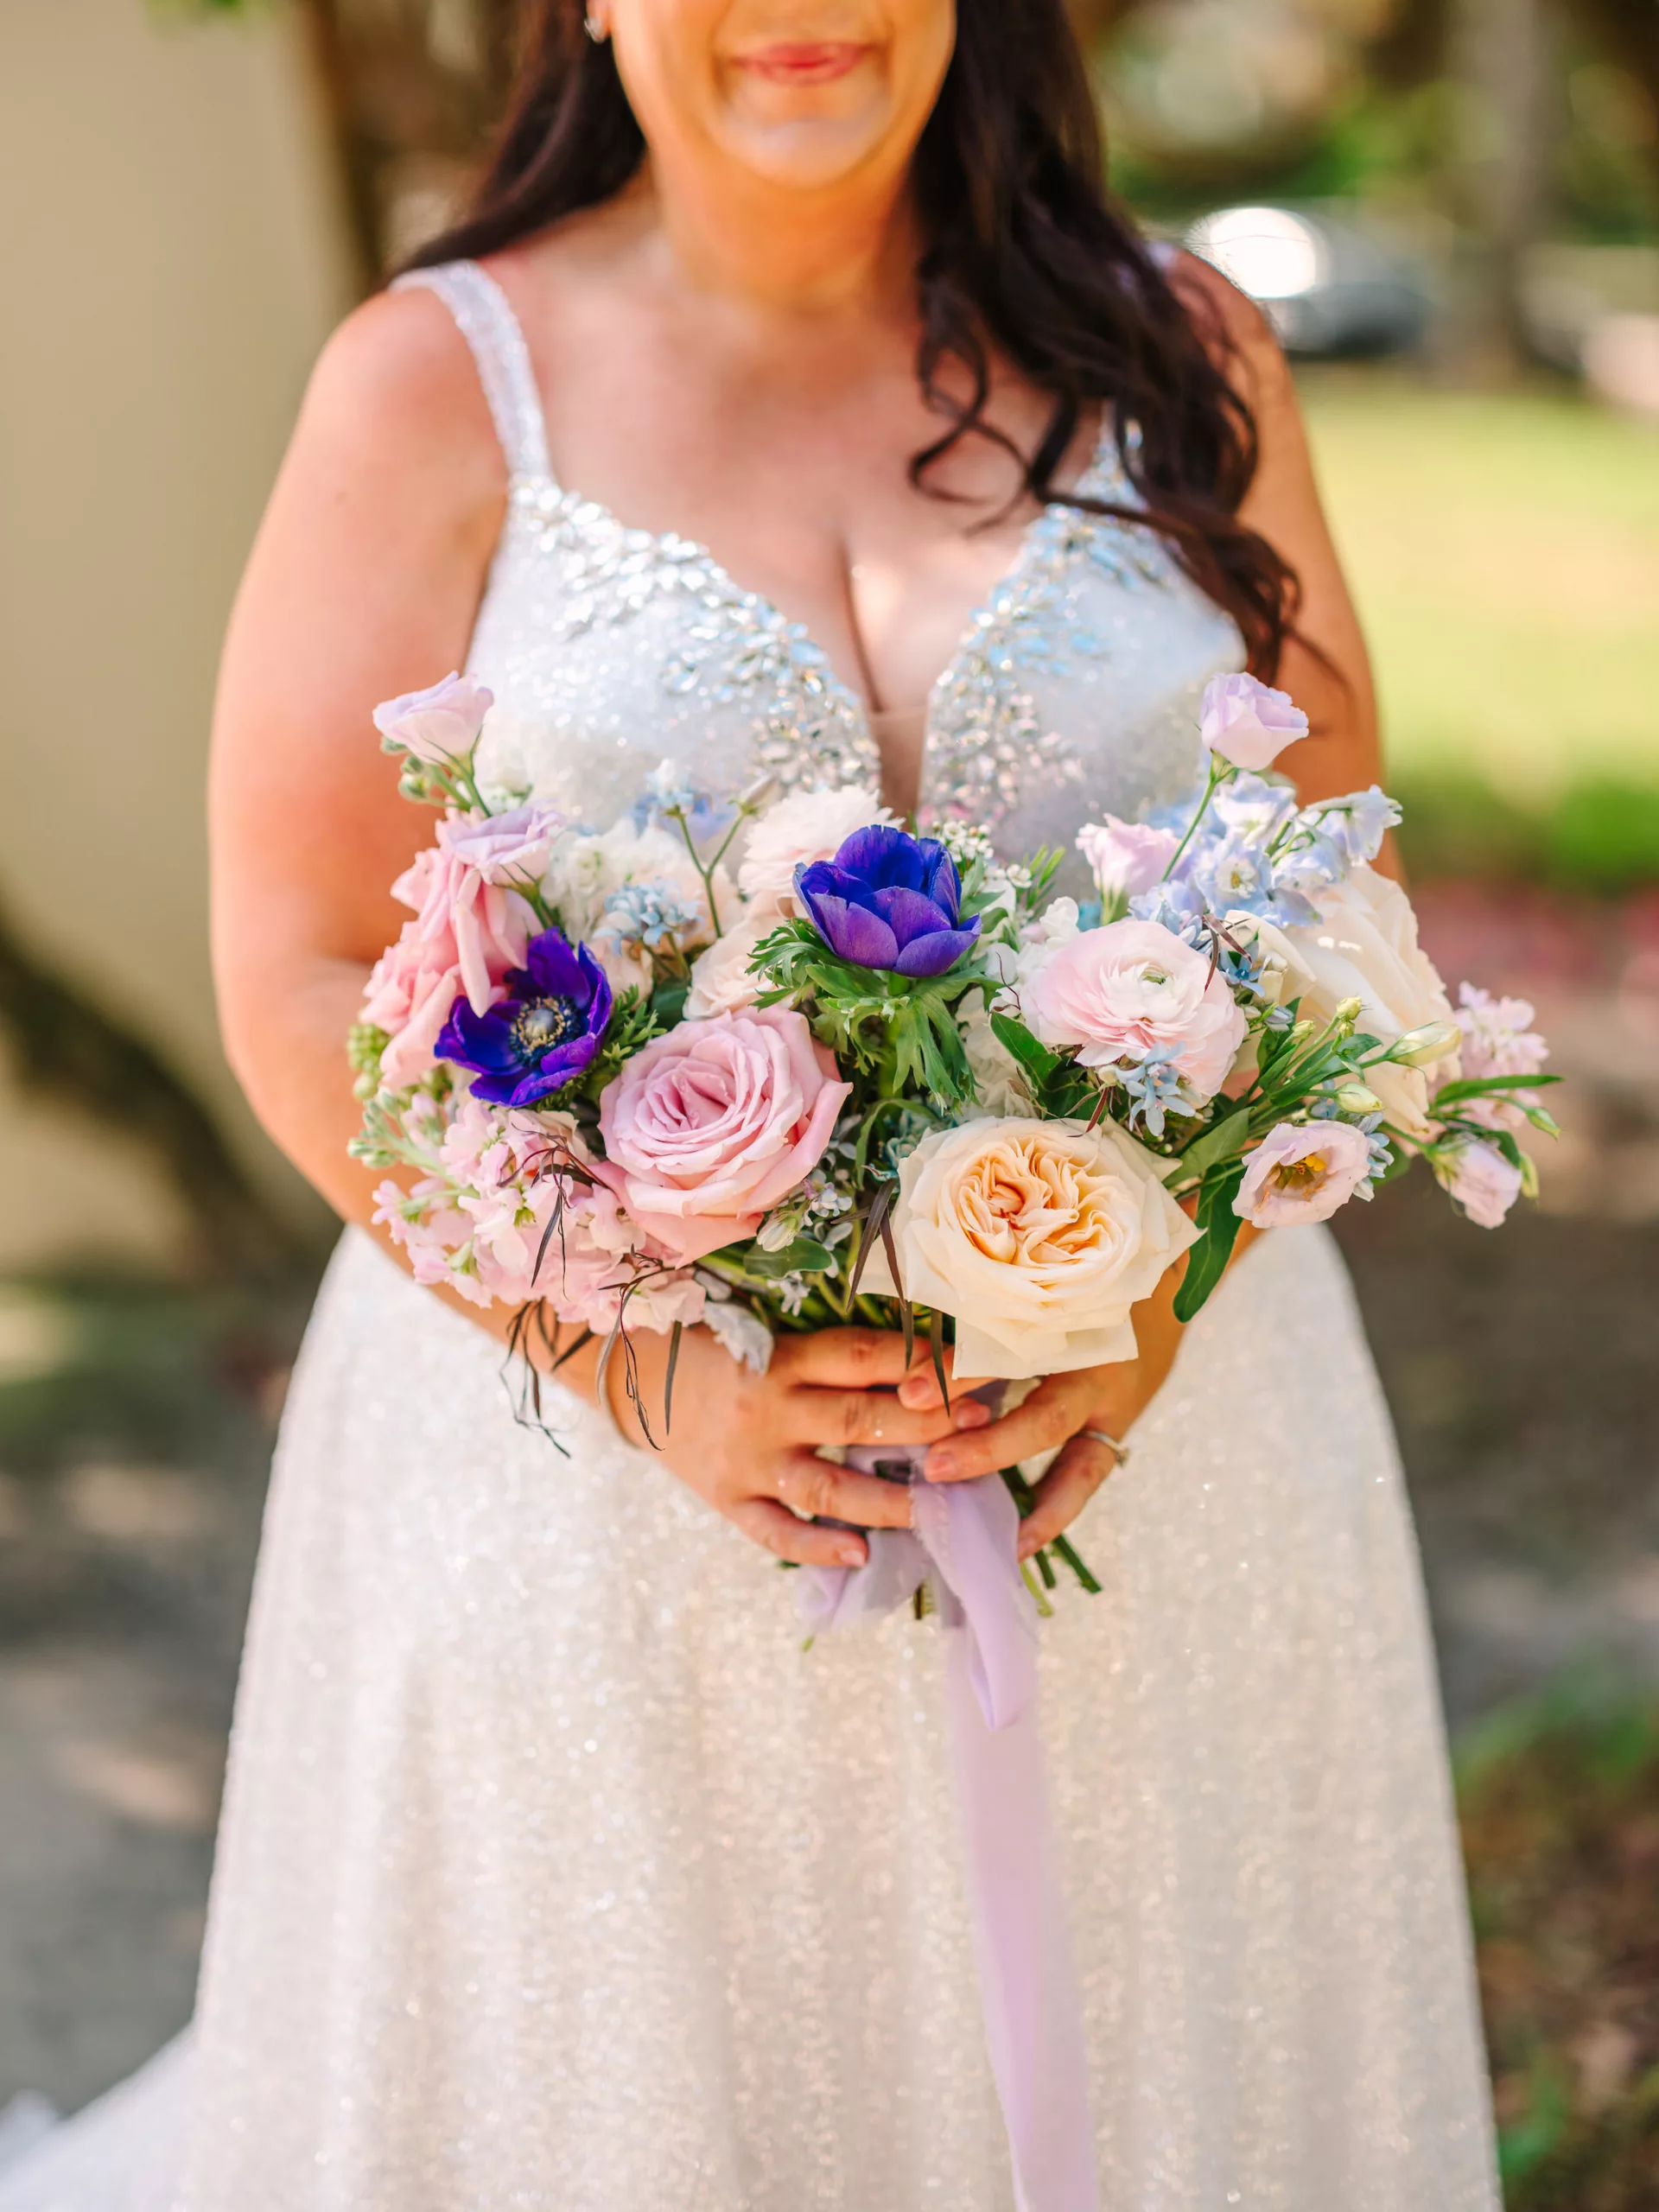 Whimsical Spring Wedding Bouquet with Purple Anemones, Orange and Pink Garden Roses, and Greenery Floral Arrangement Ideas